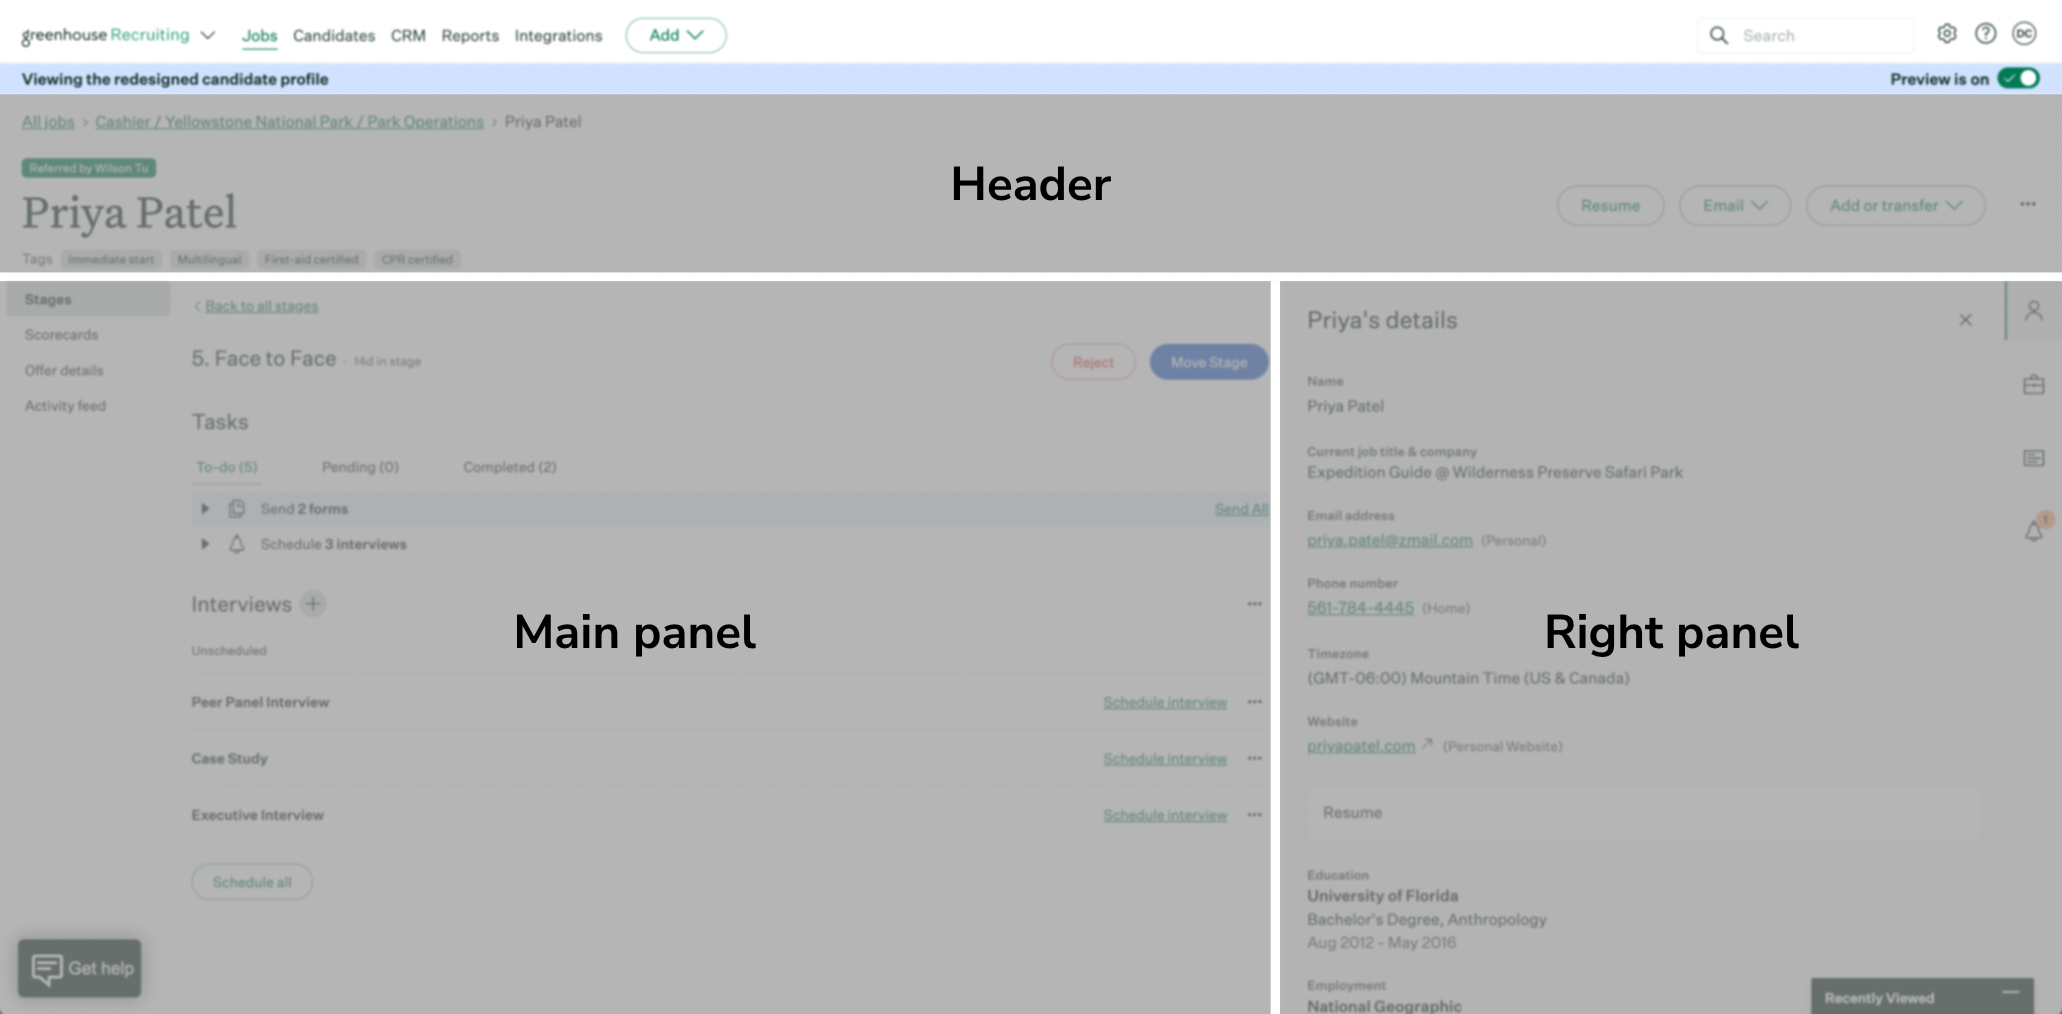 View of the new candidate profile split into the header main panel and right panel